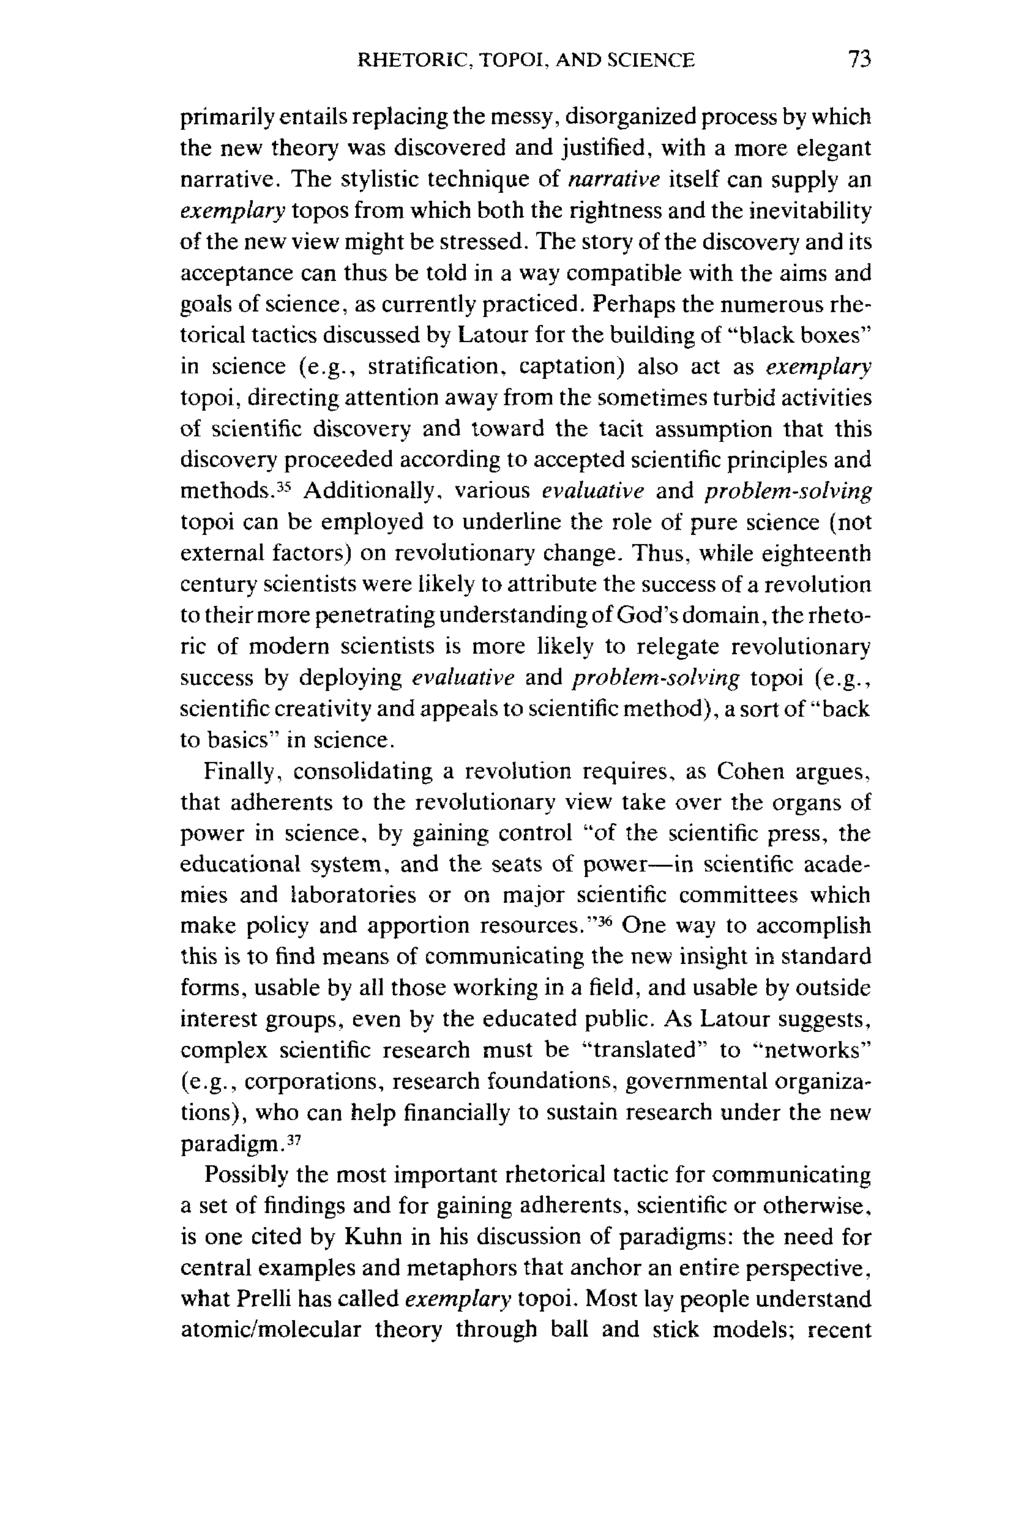 RHETORIC, TOPOI, AND SCIENCE 73 primariiy entaiis replacing the messy, disorganized process by which the new theory was discovered and justified, with a more elegant narrative.